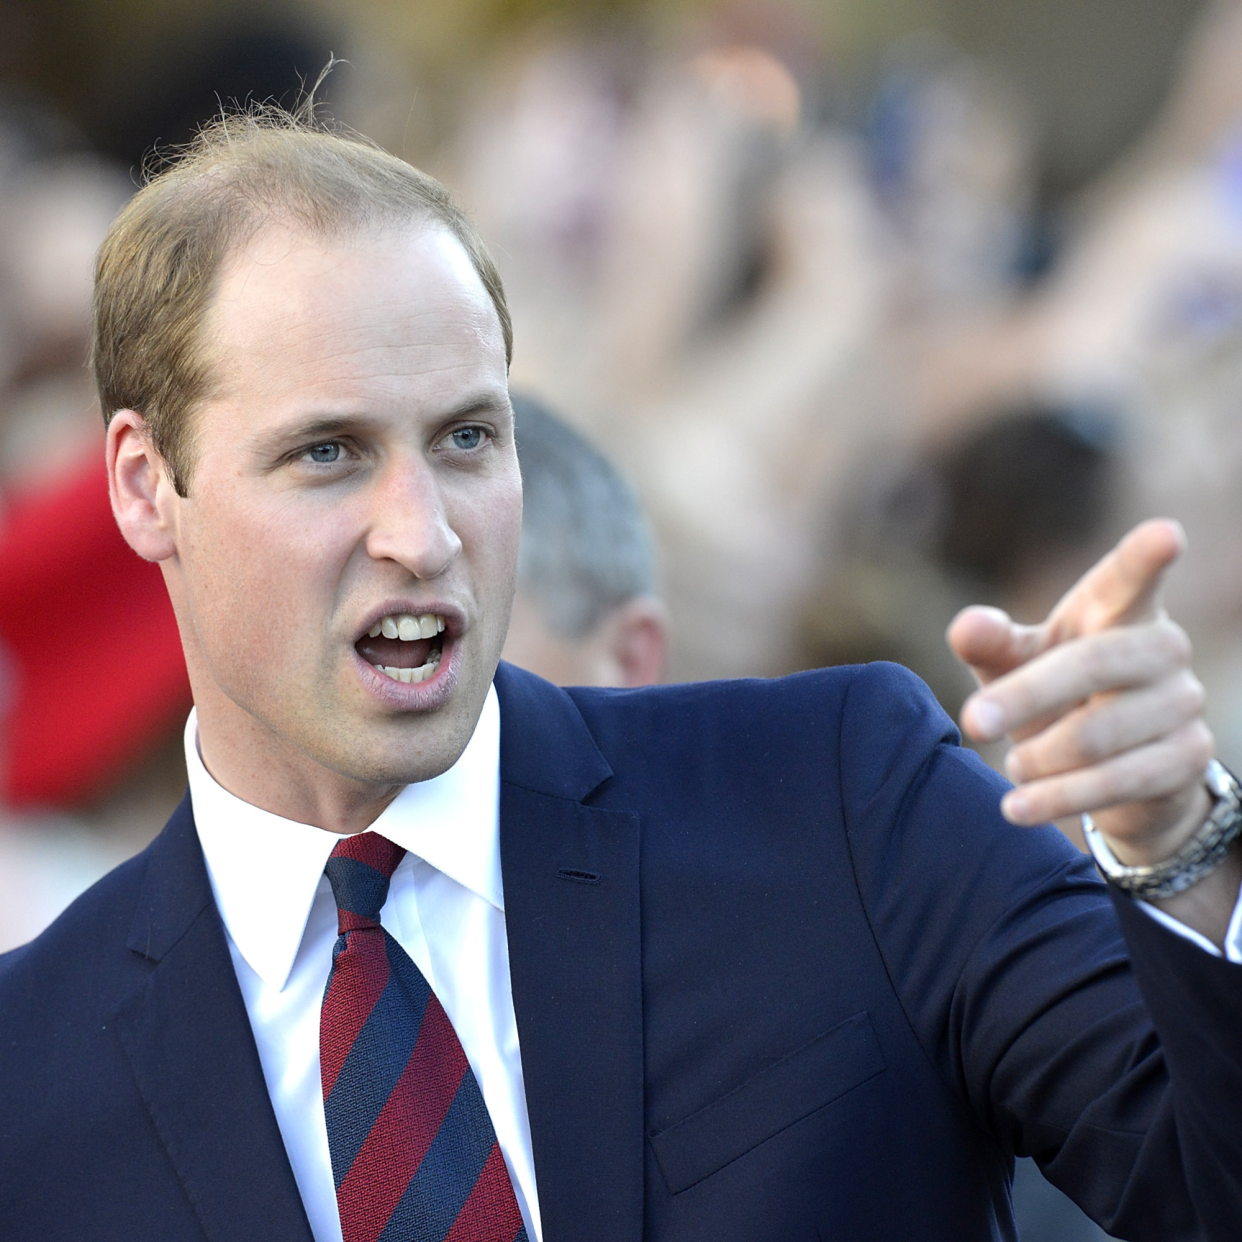  Prince William, Duke of Cambridge is seen pointing to something in the crowd on April 19, 2014 in Brisbane, Australia. 